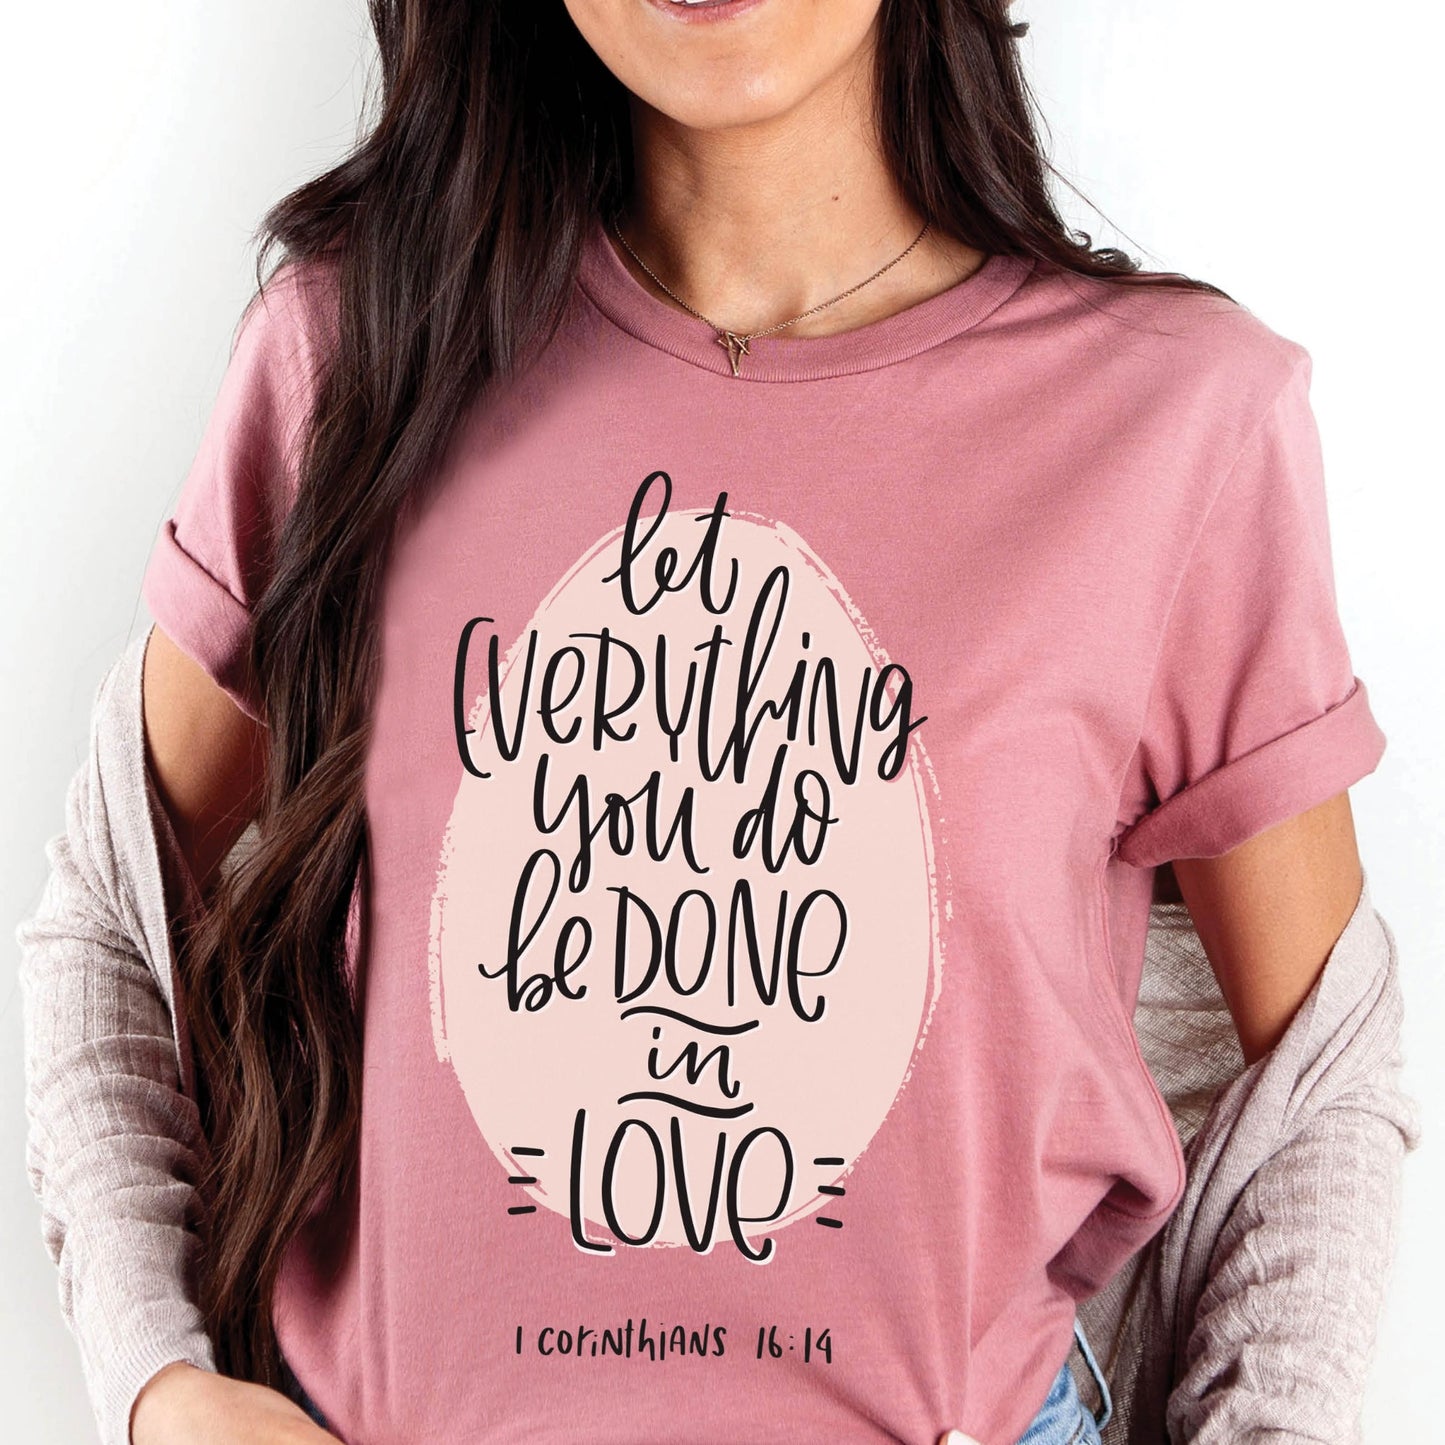 Soft quality mauve dusty rose t-shirt with 1 Corinthians 16:14 Let Everything You Do Be Done In Love bible verse printed in blush pink and black - Christian aesthetic unisex tee shirt design for women